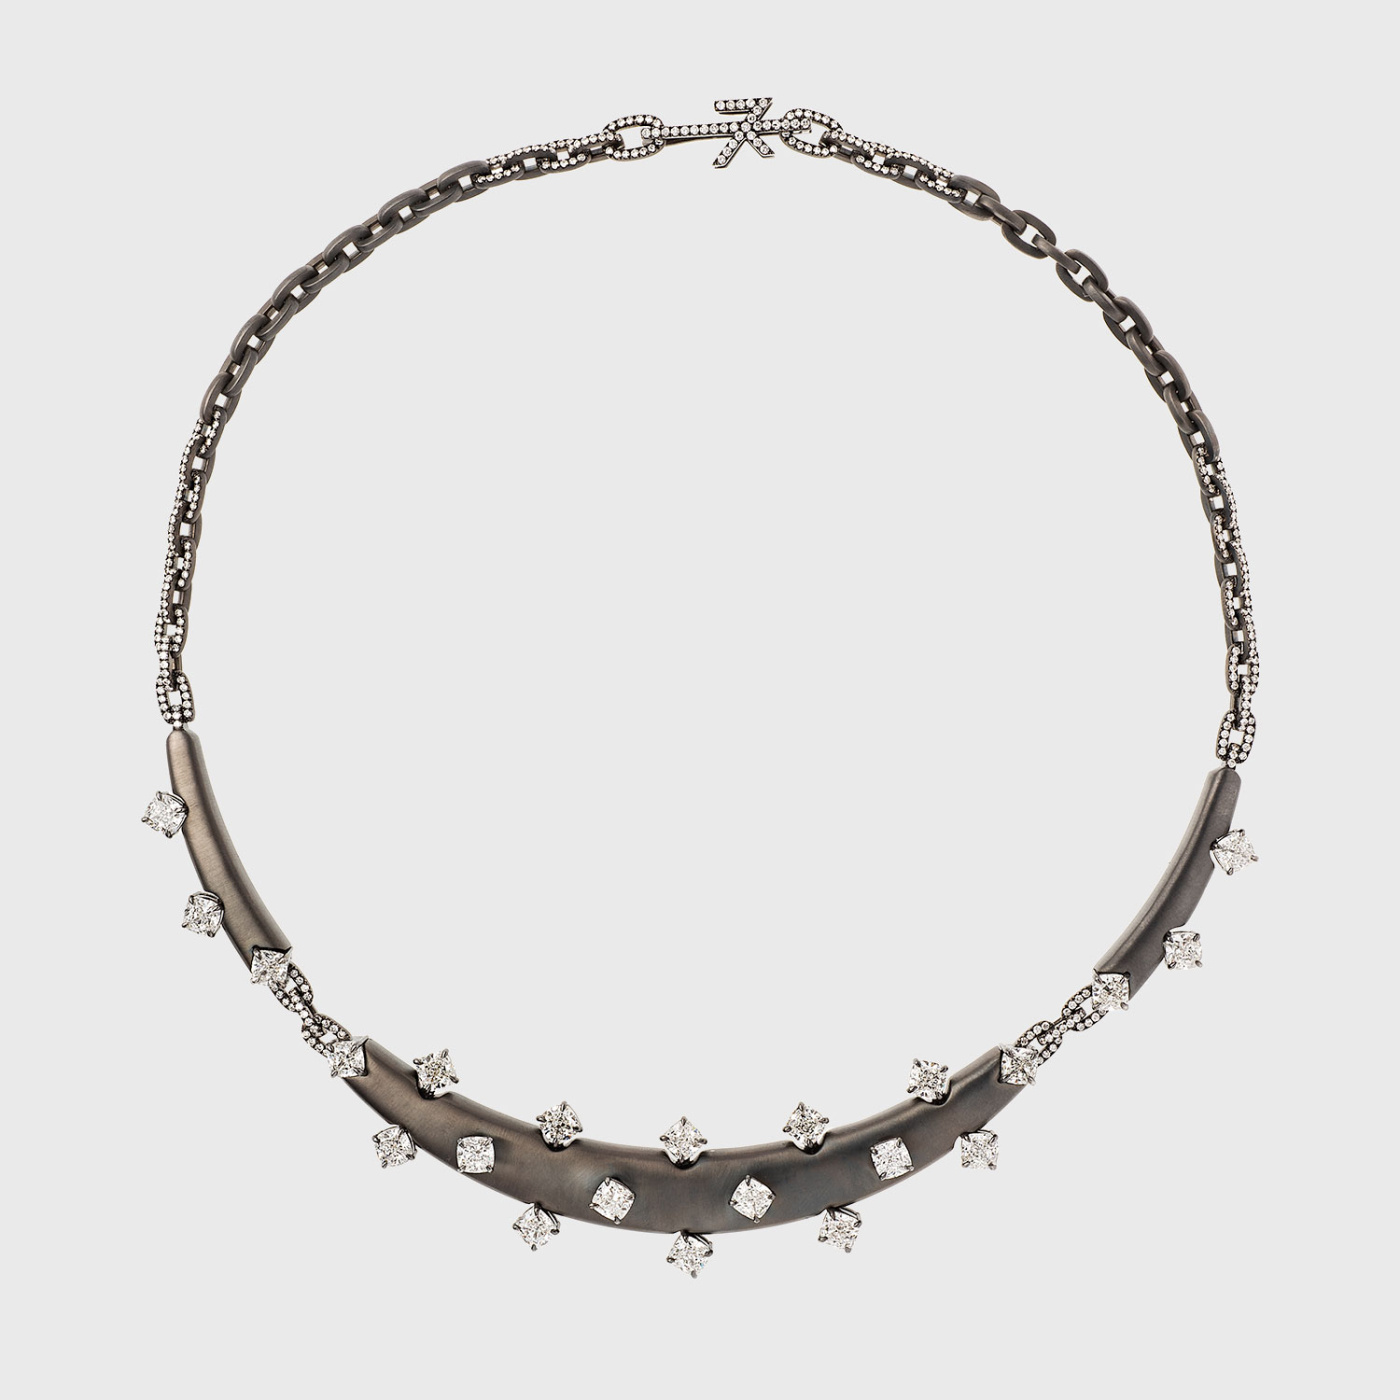 Blackened white gold necklace with cushion and paved white diamonds